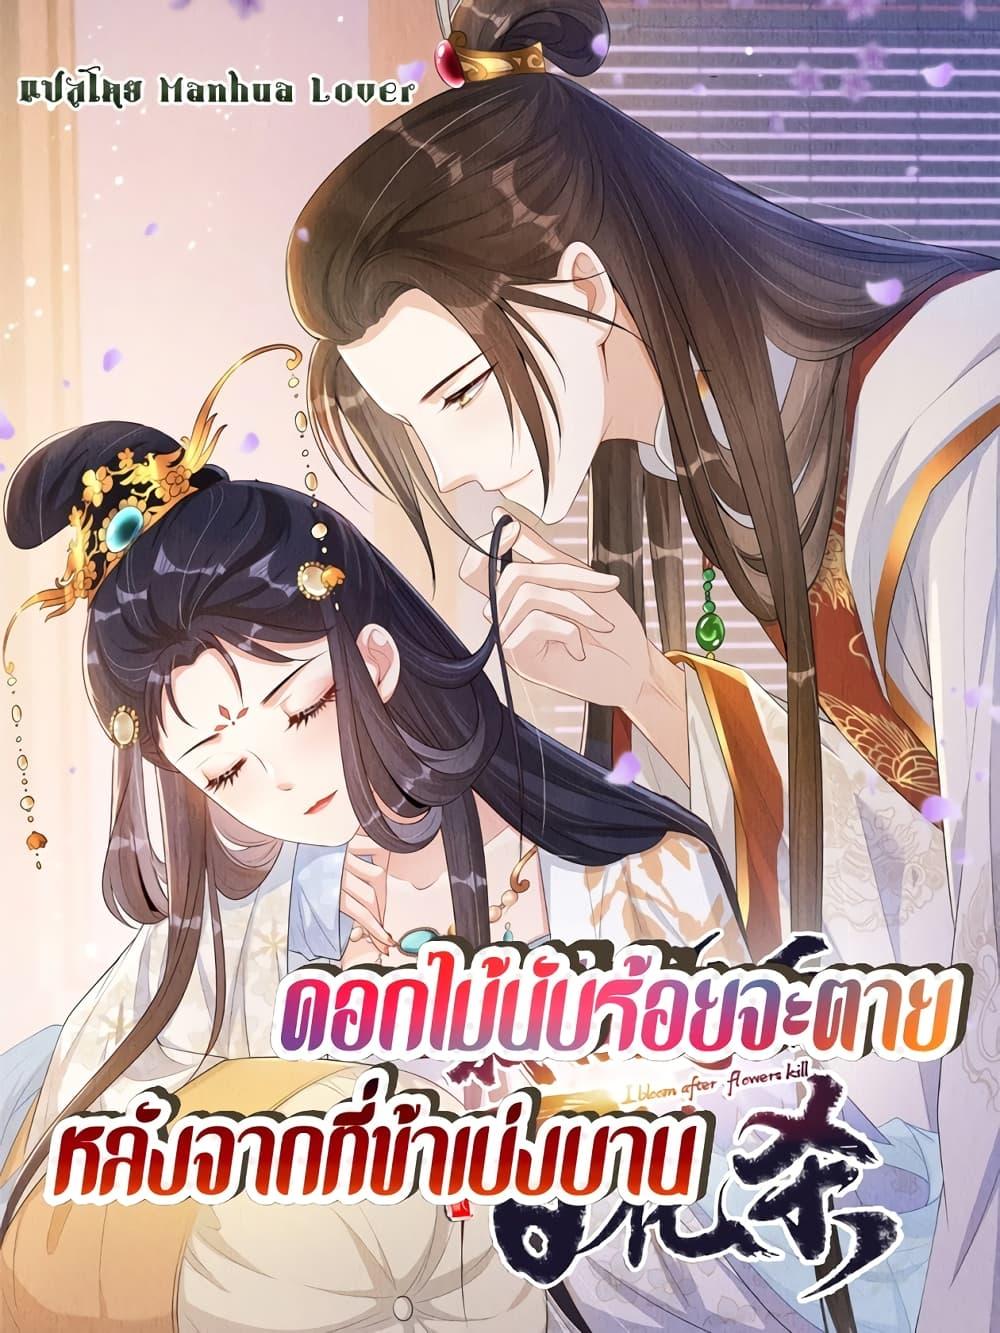 After I Bloom, a Hundred Flowers Will ill – ดอกไม้นับ ตอนที่ 70 (1)